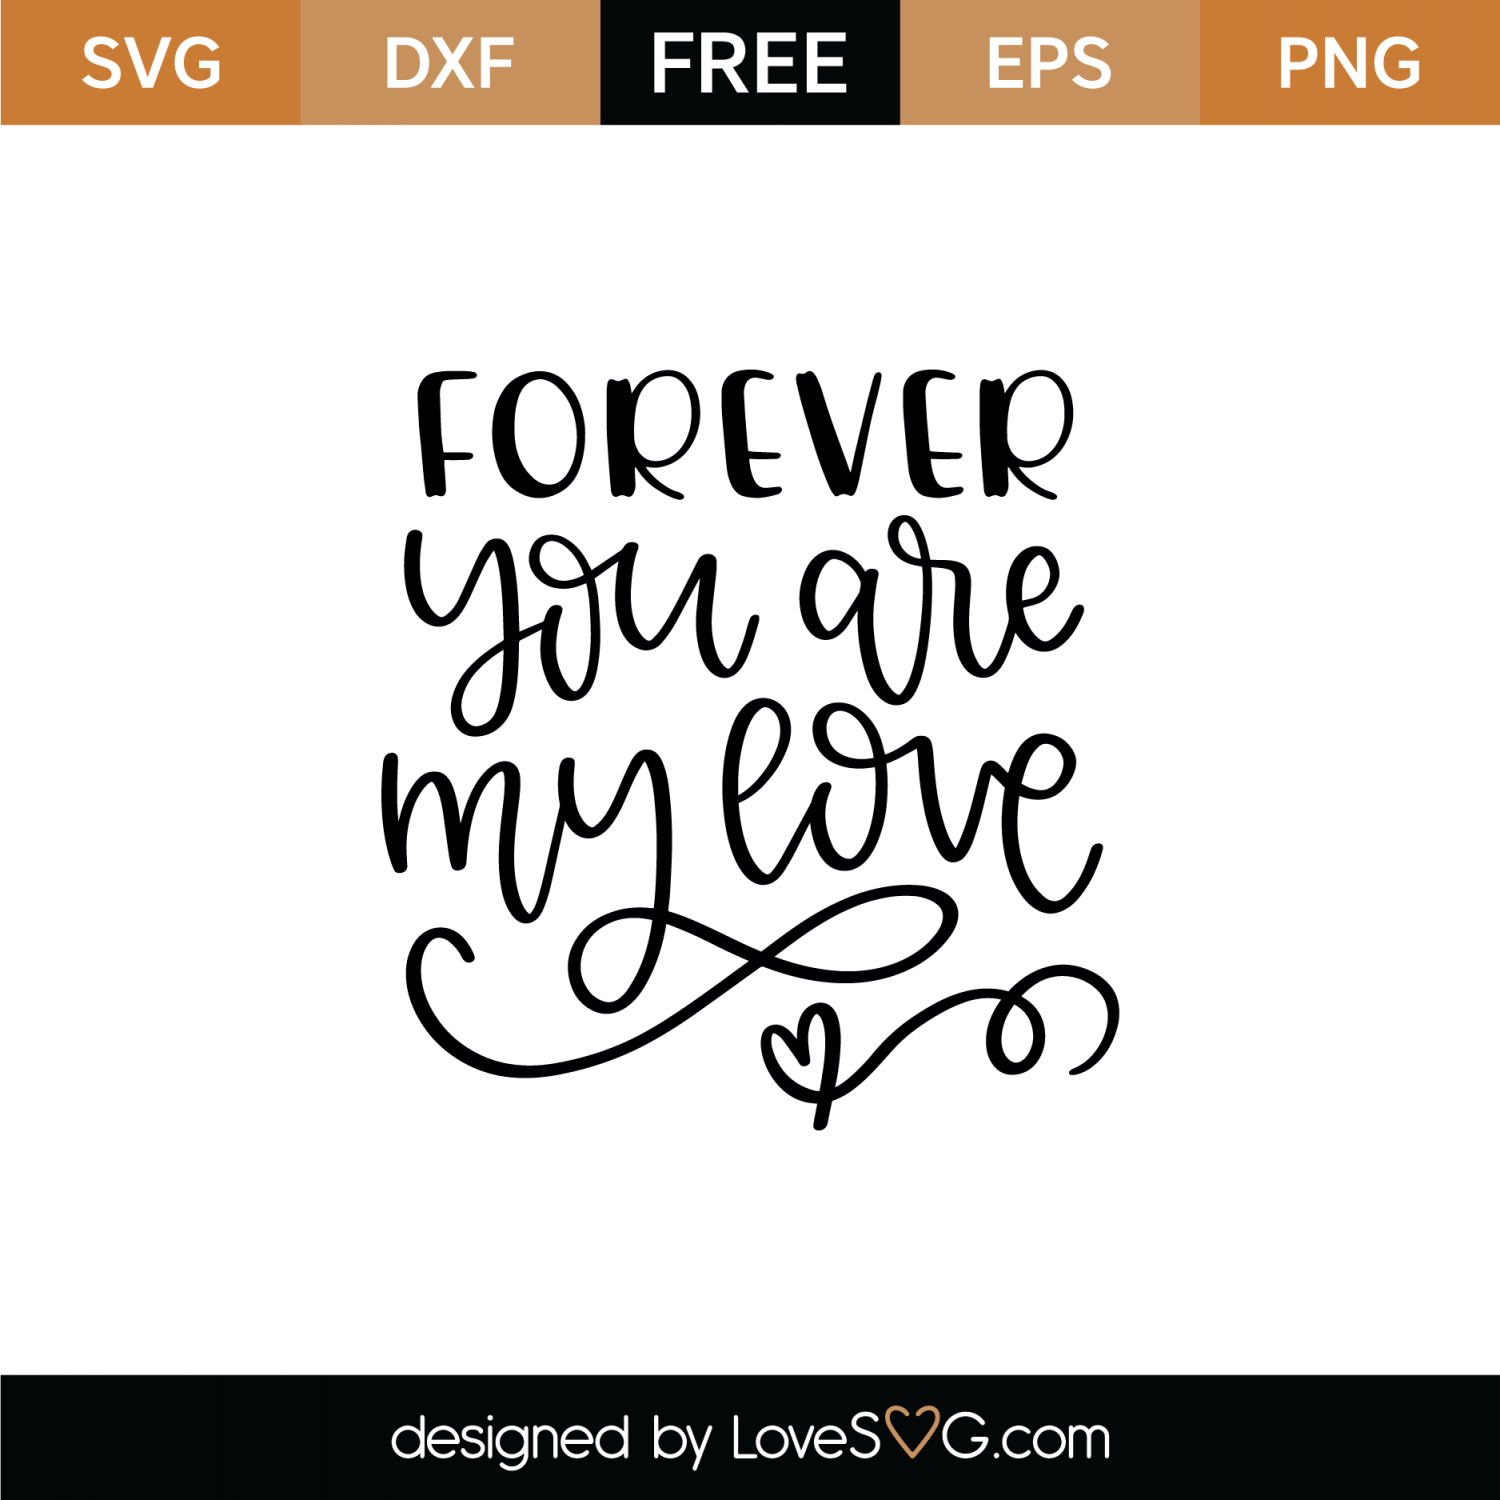 Download Free Forever You Are My Love SVG Cut File | Lovesvg.com